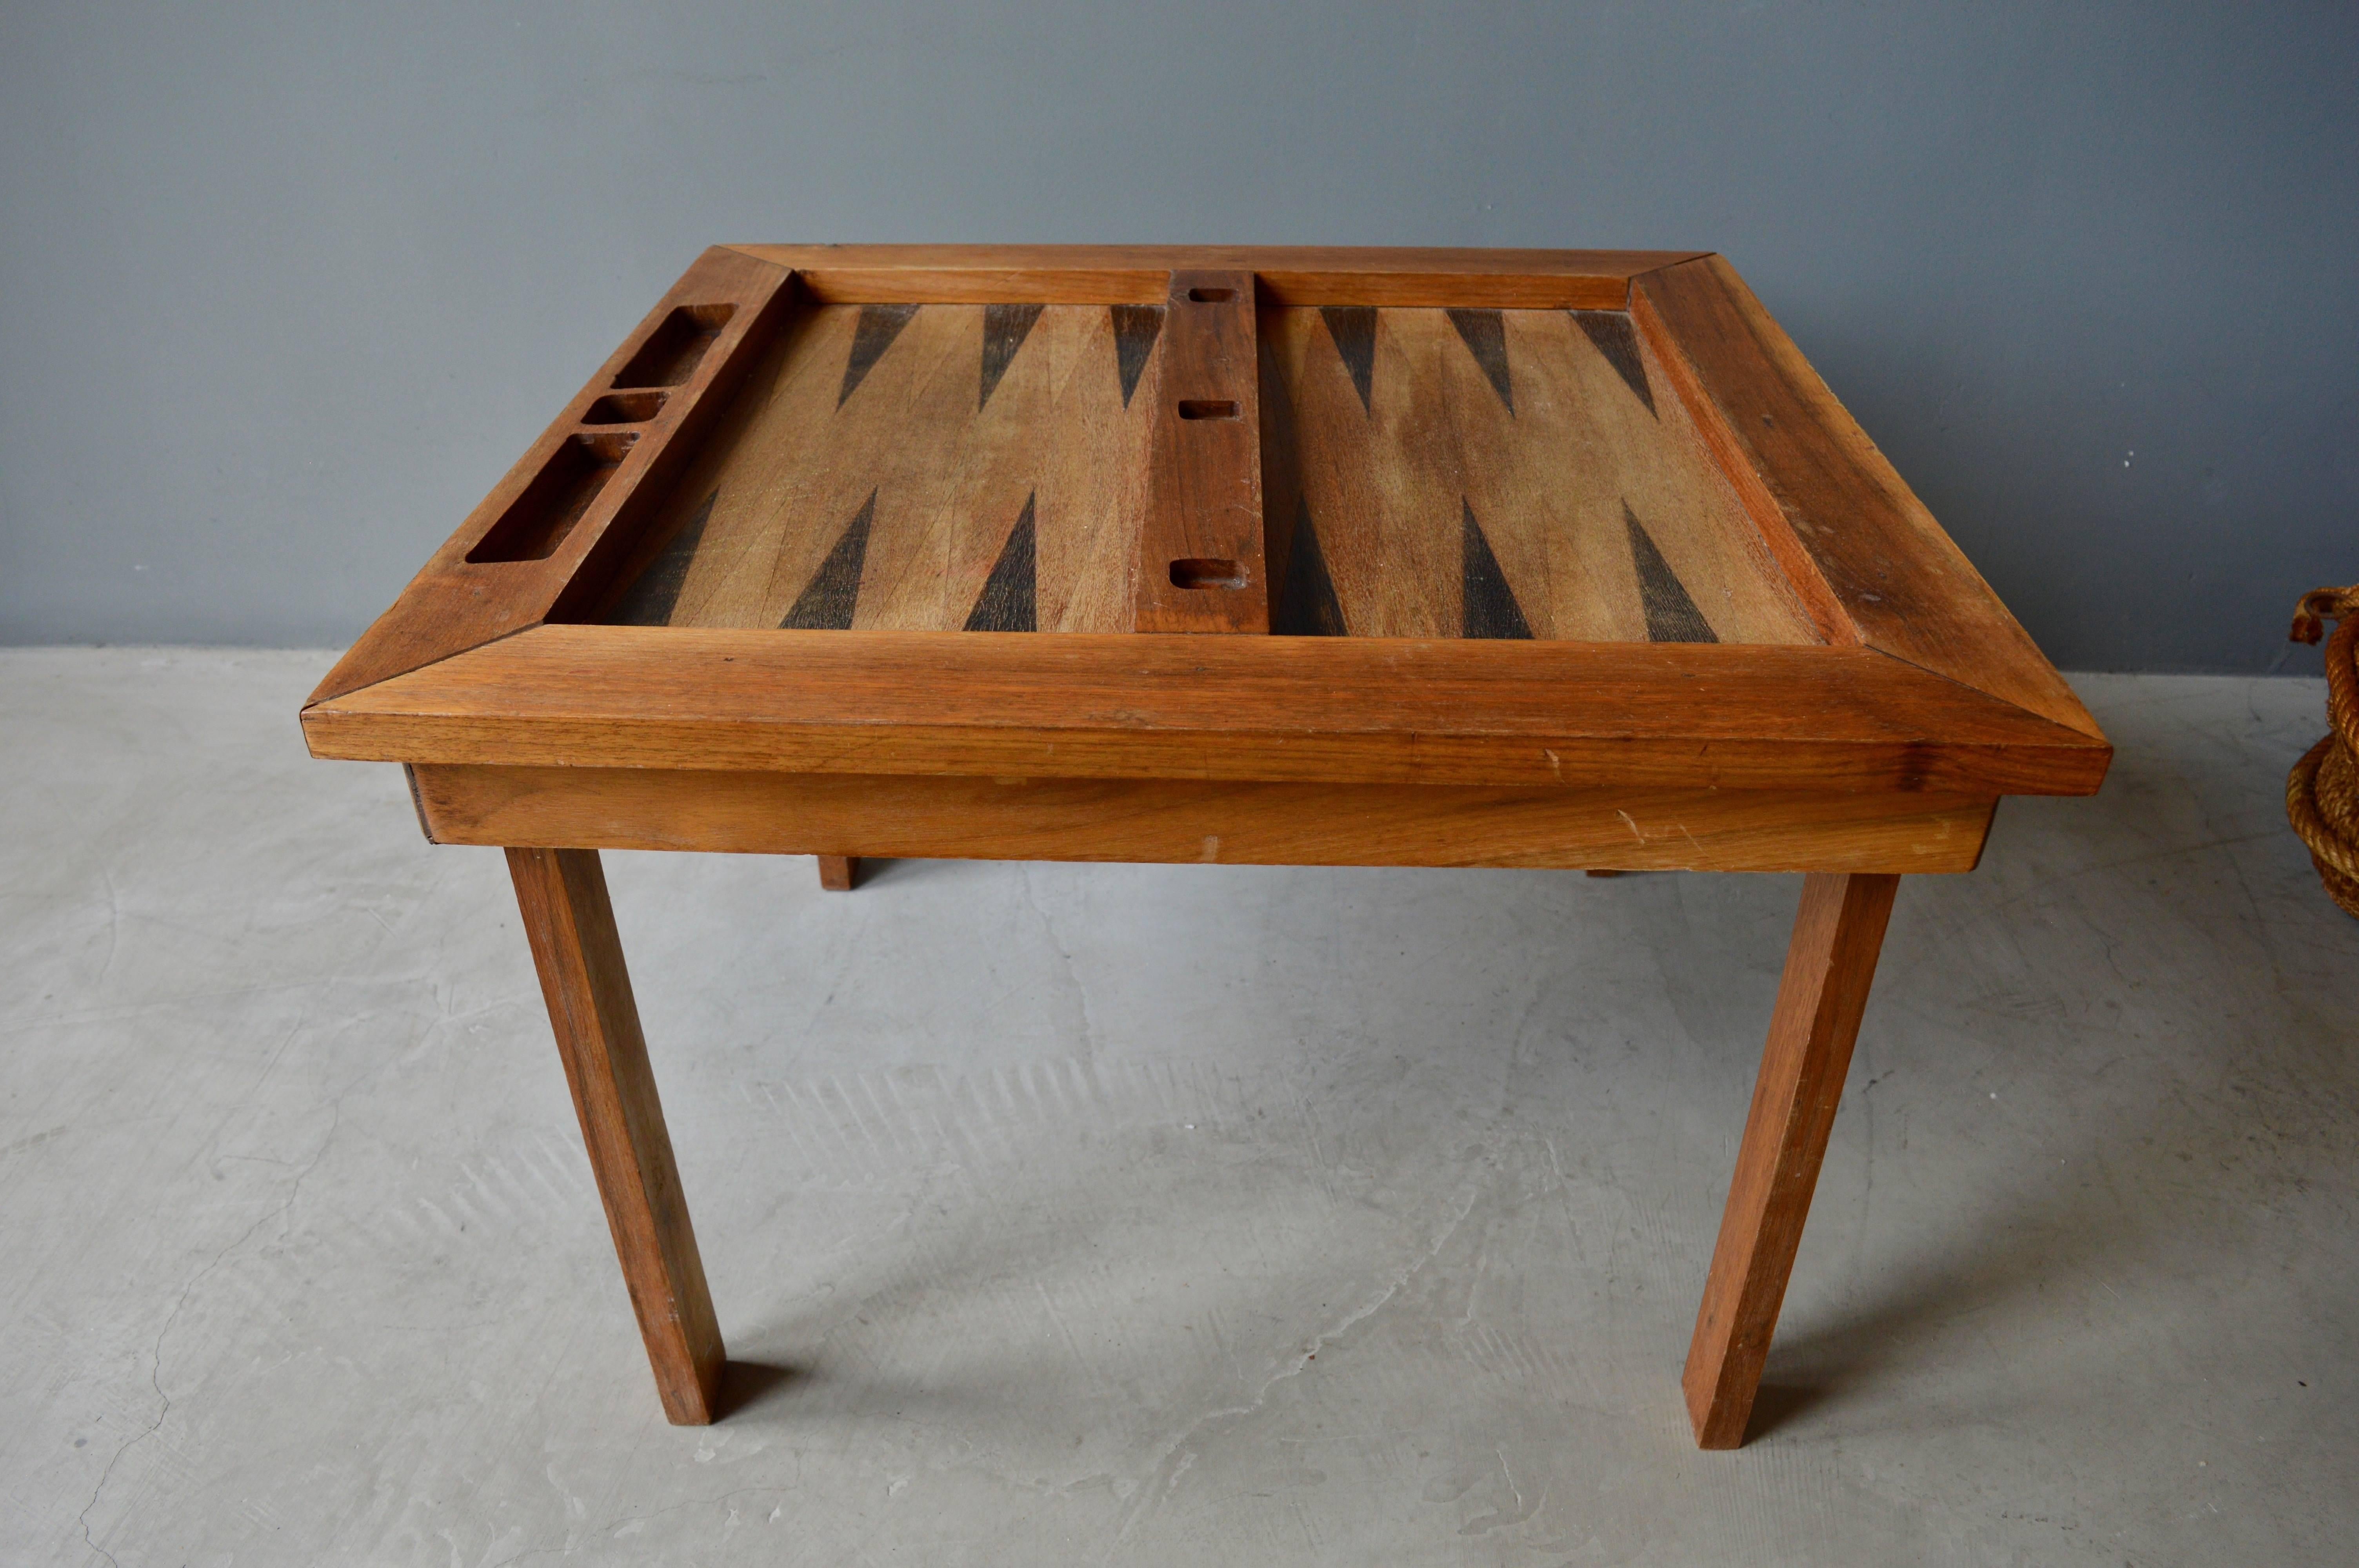 Great handmade folk art backgammon table. Great scale. Perfect as a side table between two chairs. Great sculptural piece. Excellent vintage condition.